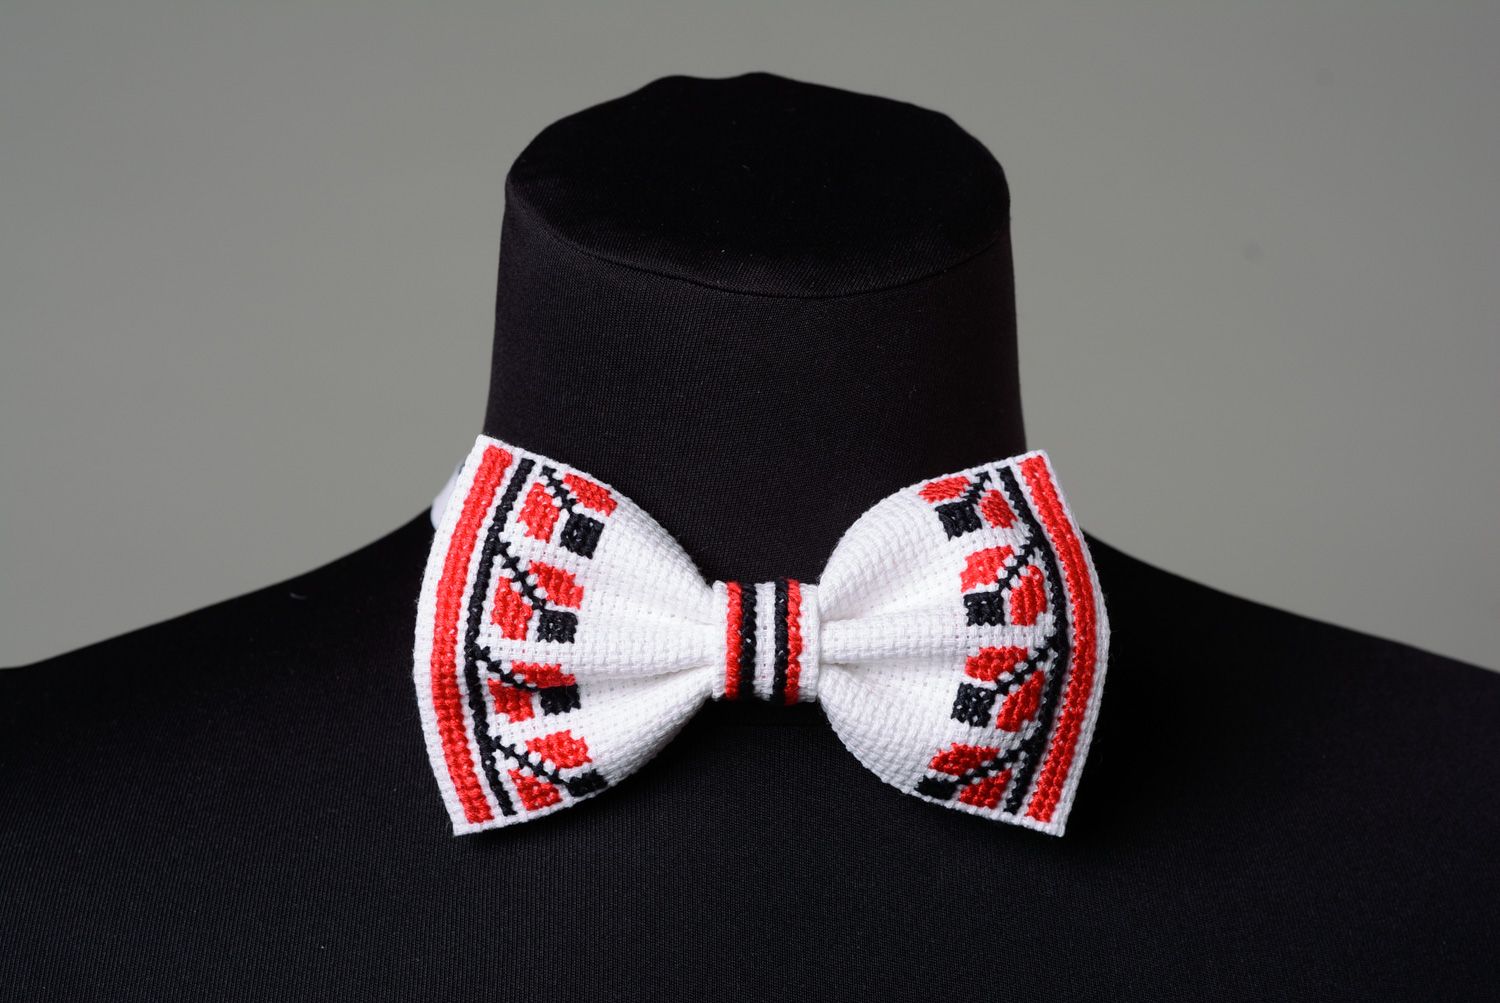 Handmade white festive bow tie with cross stitch embroidery in ethnic style for men photo 1